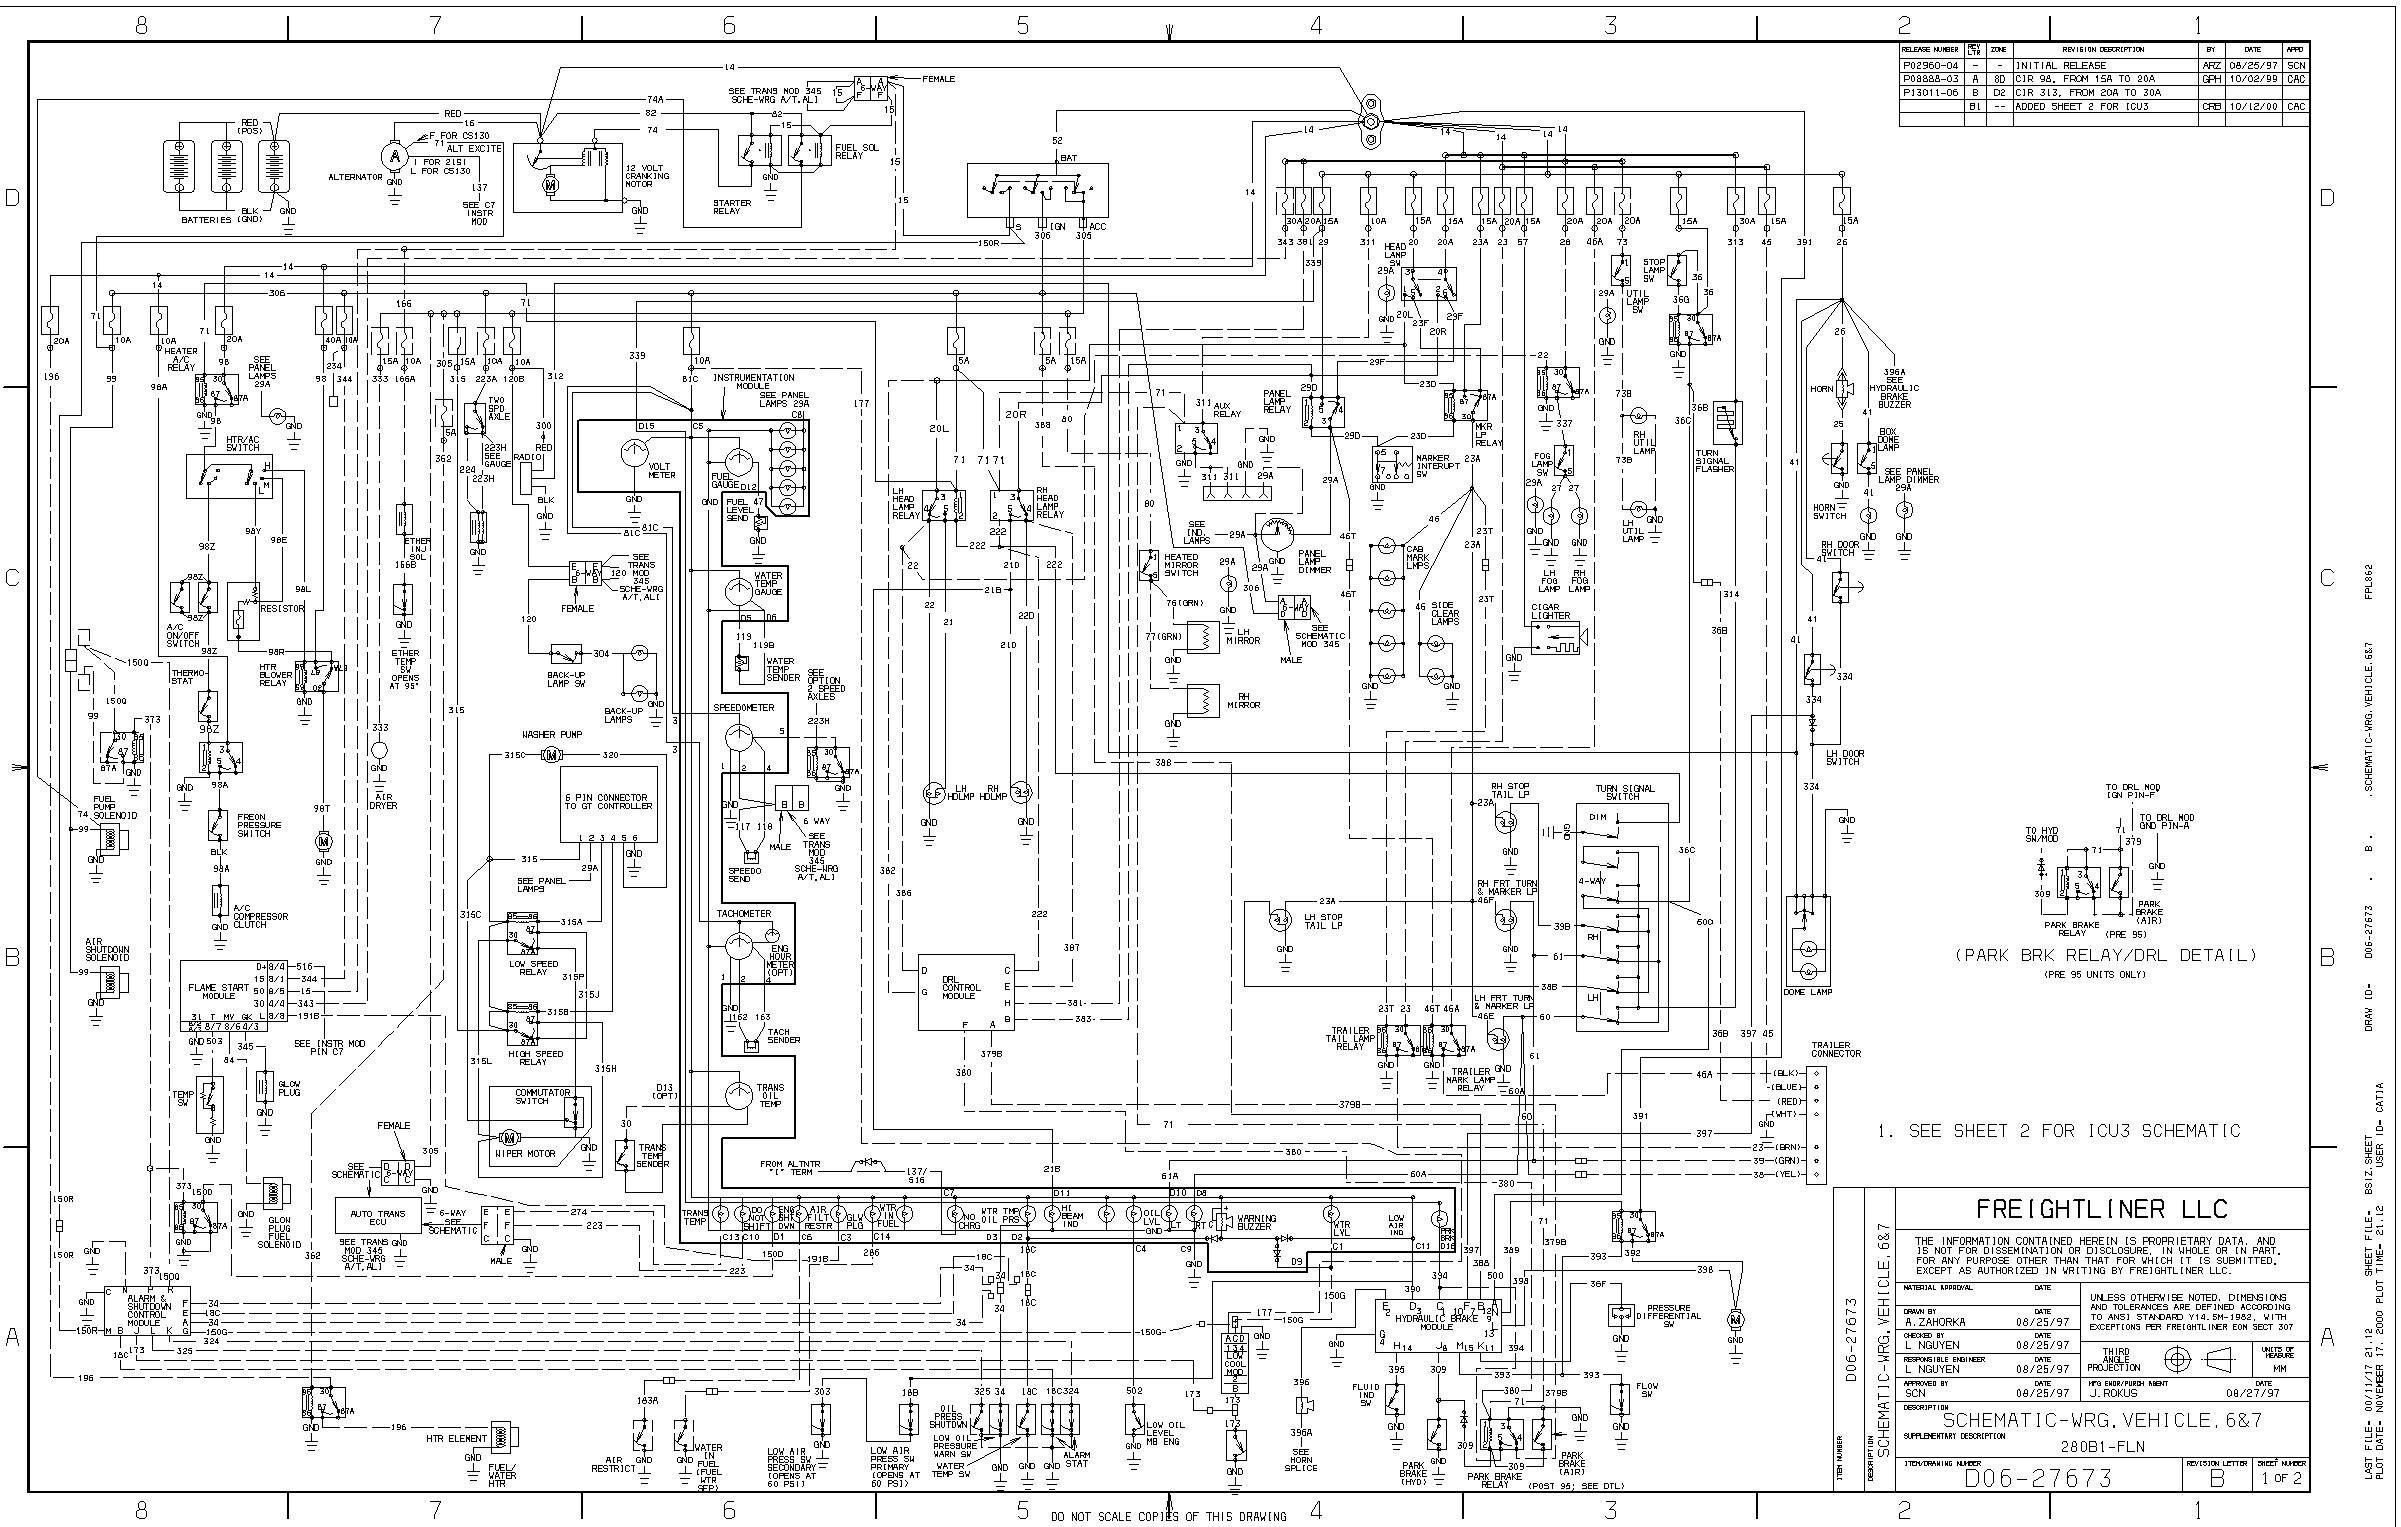 Air Schematic for Fl80 Freightliner Diagram] 98 Freightliner Fuse Diagram Full Version Hd Quality Fuse … Of Air Schematic for Fl80 Freightliner